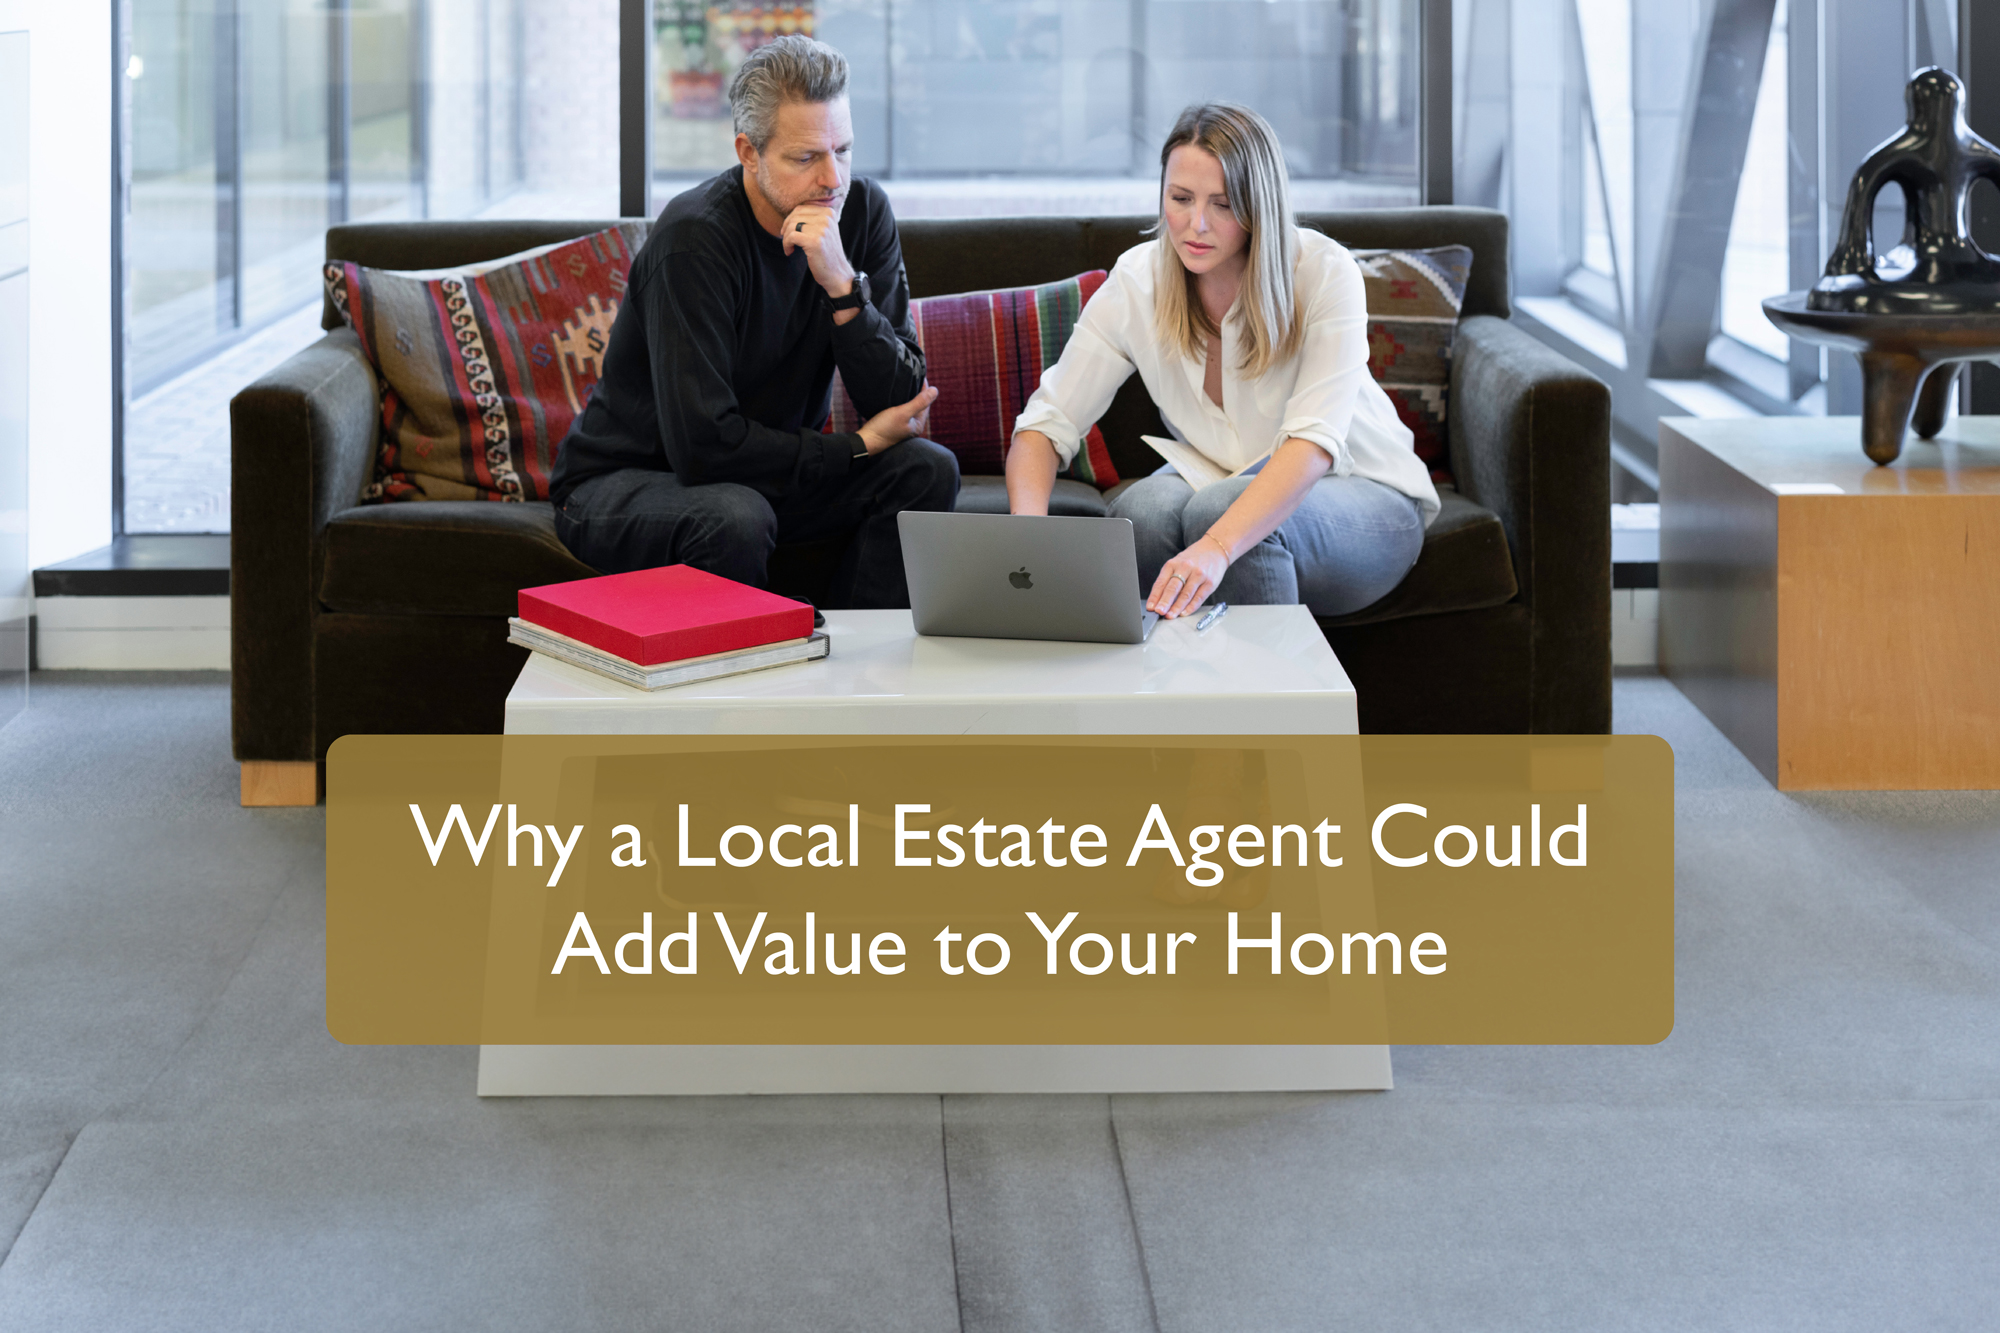 Why a Local Estate Agent Could Add Value to Your Home